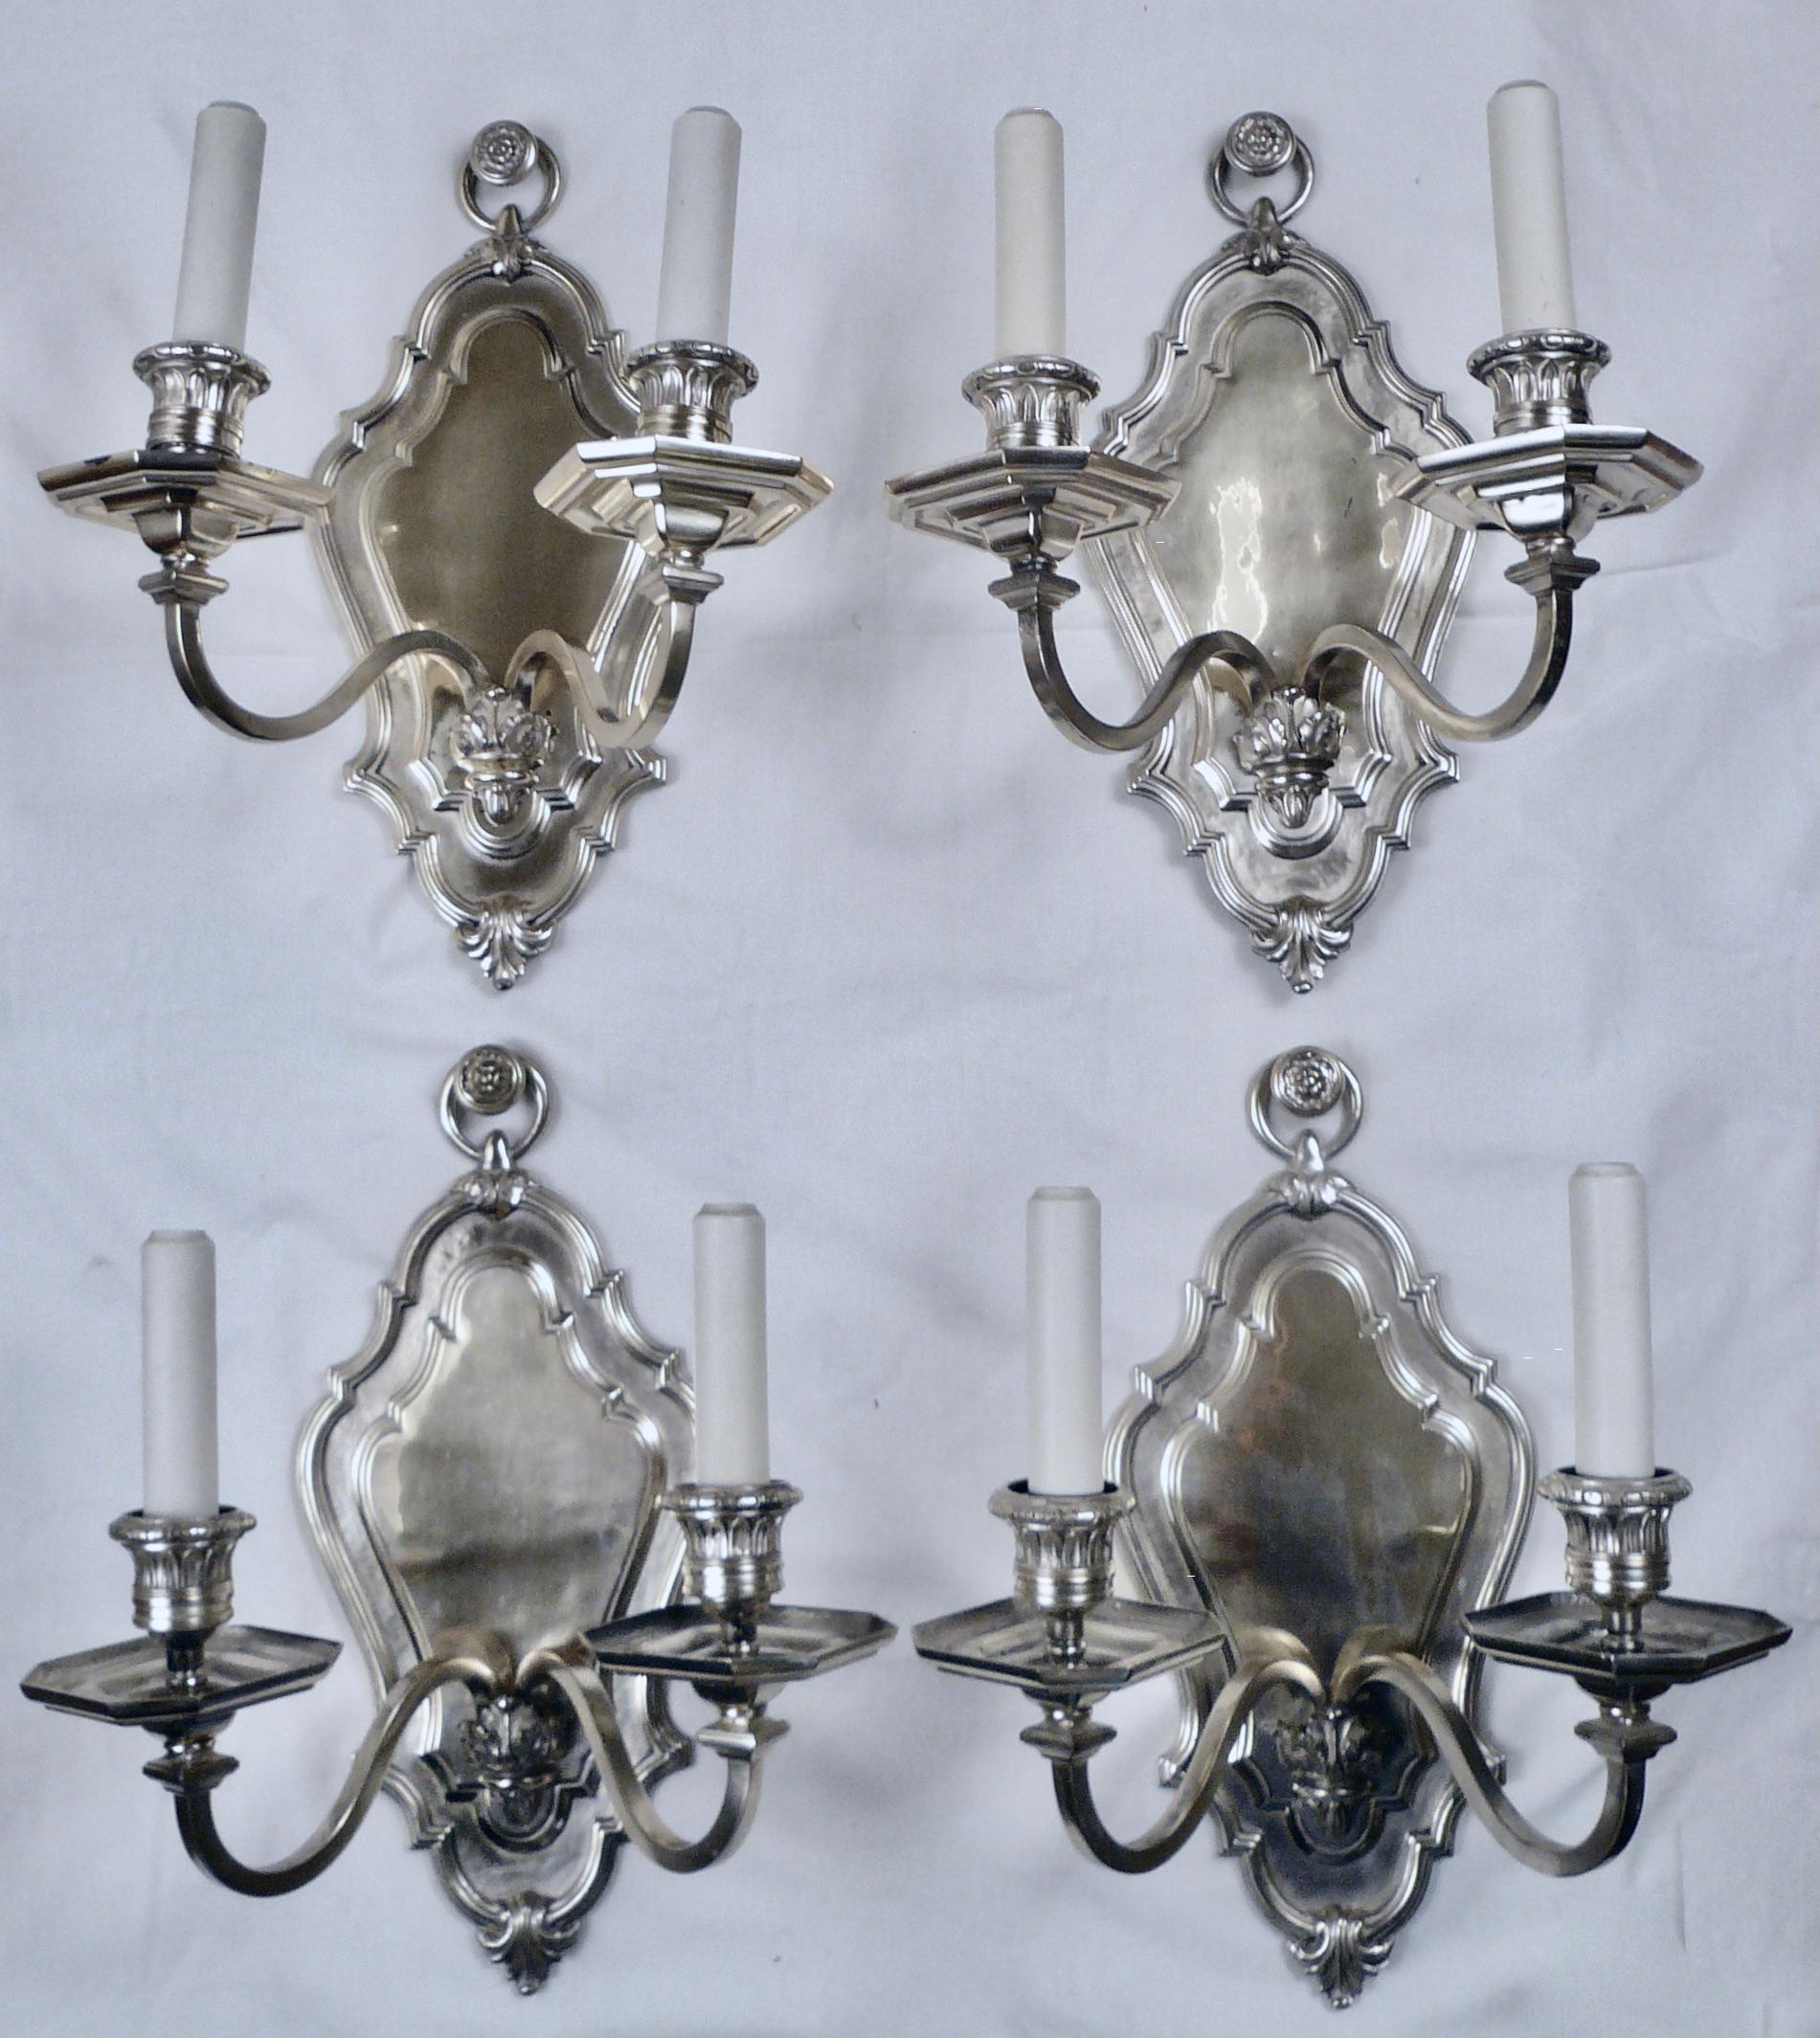 This set of four silver sconces by Caldwell feature classic early Georgian style details, including acanthus leaves and floral rosettes.